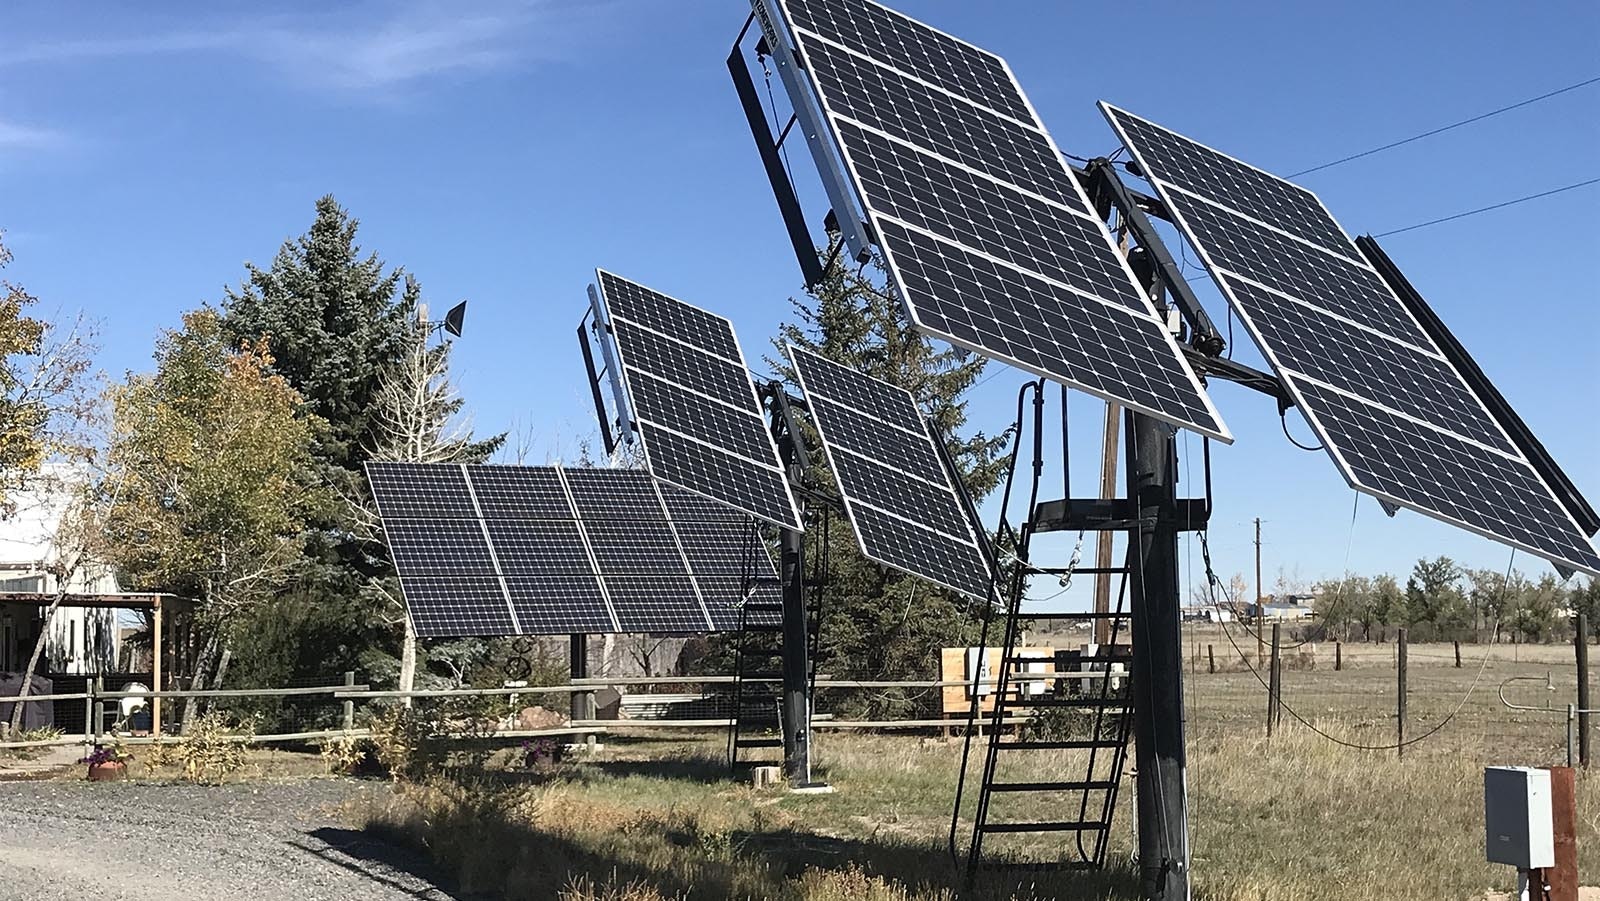 Solar panels produce power for Dr. Jason Bloomberg at his home outside Cheyenne.